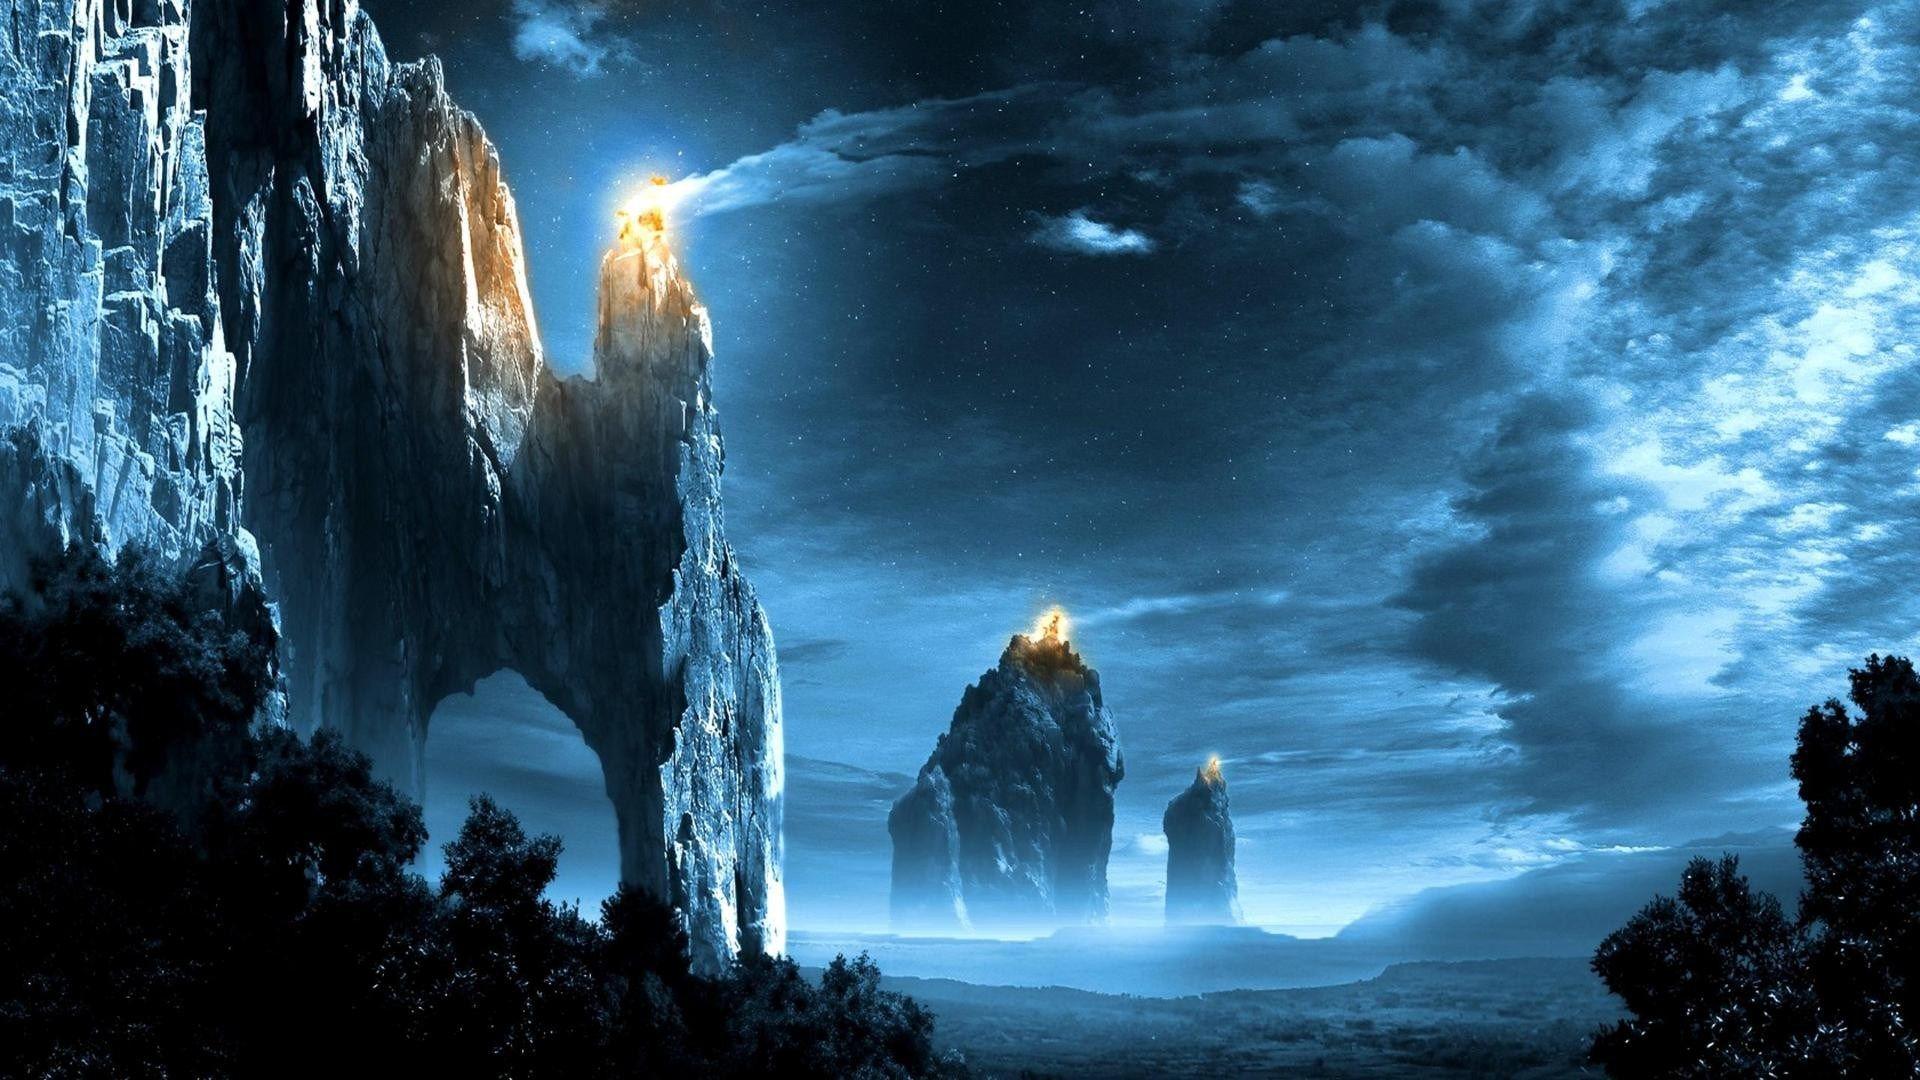 Lord Of The Rings Wallpaper Download. Free Wallpaper